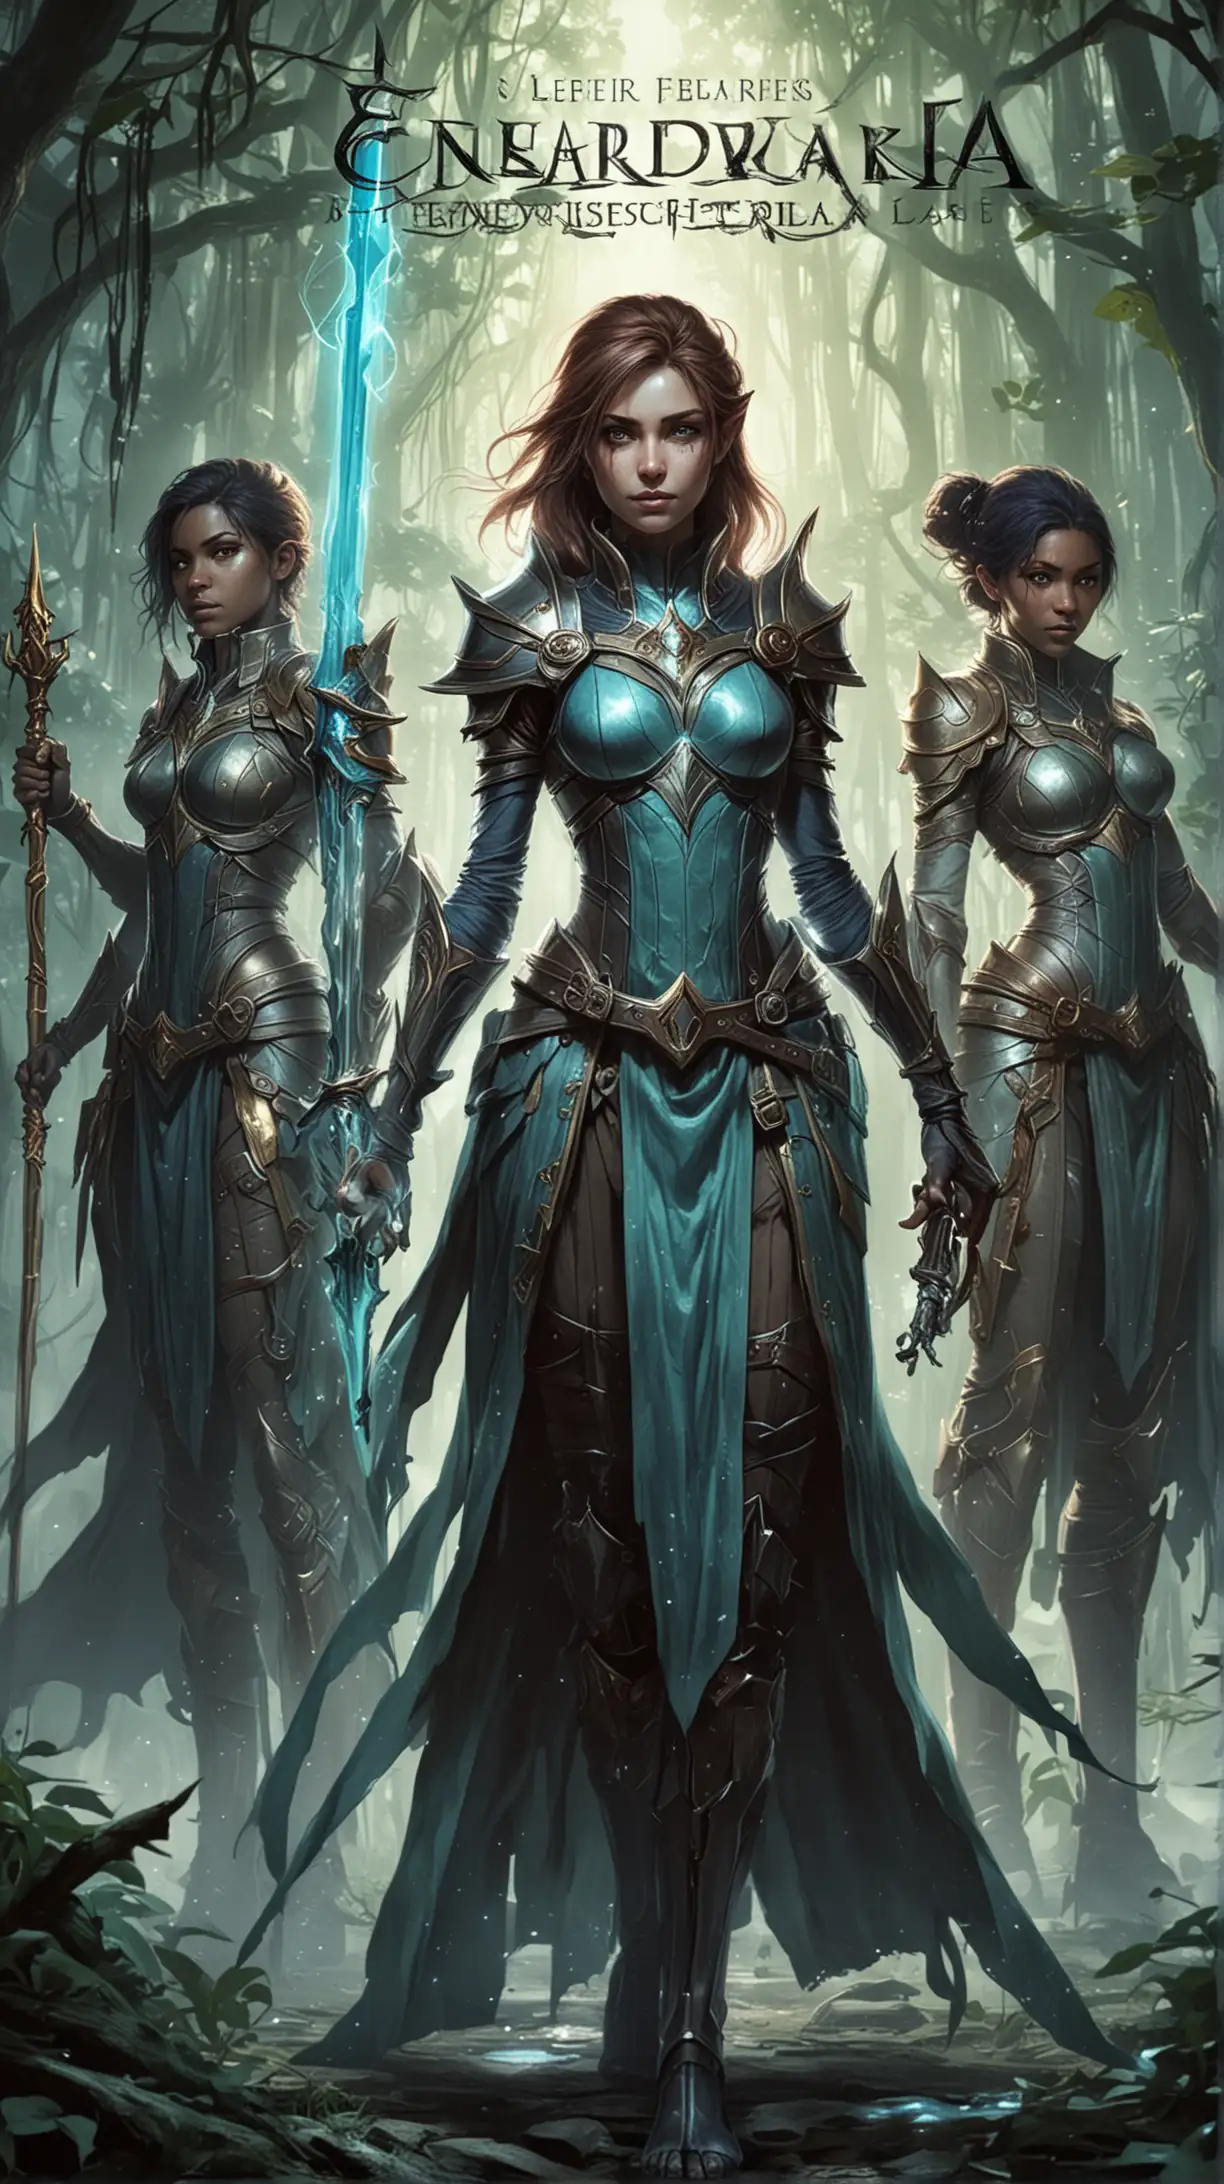 Elara and her friends delve deeper into the mysteries of the enchanted realm, they uncover a hidden prophecy foretelling the rise of a chosen one who will vanquish the Shadowweaver and restore peace to Elysia. Could Elara be the key to fulfilling this prophecy, or is there another destined hero among them?